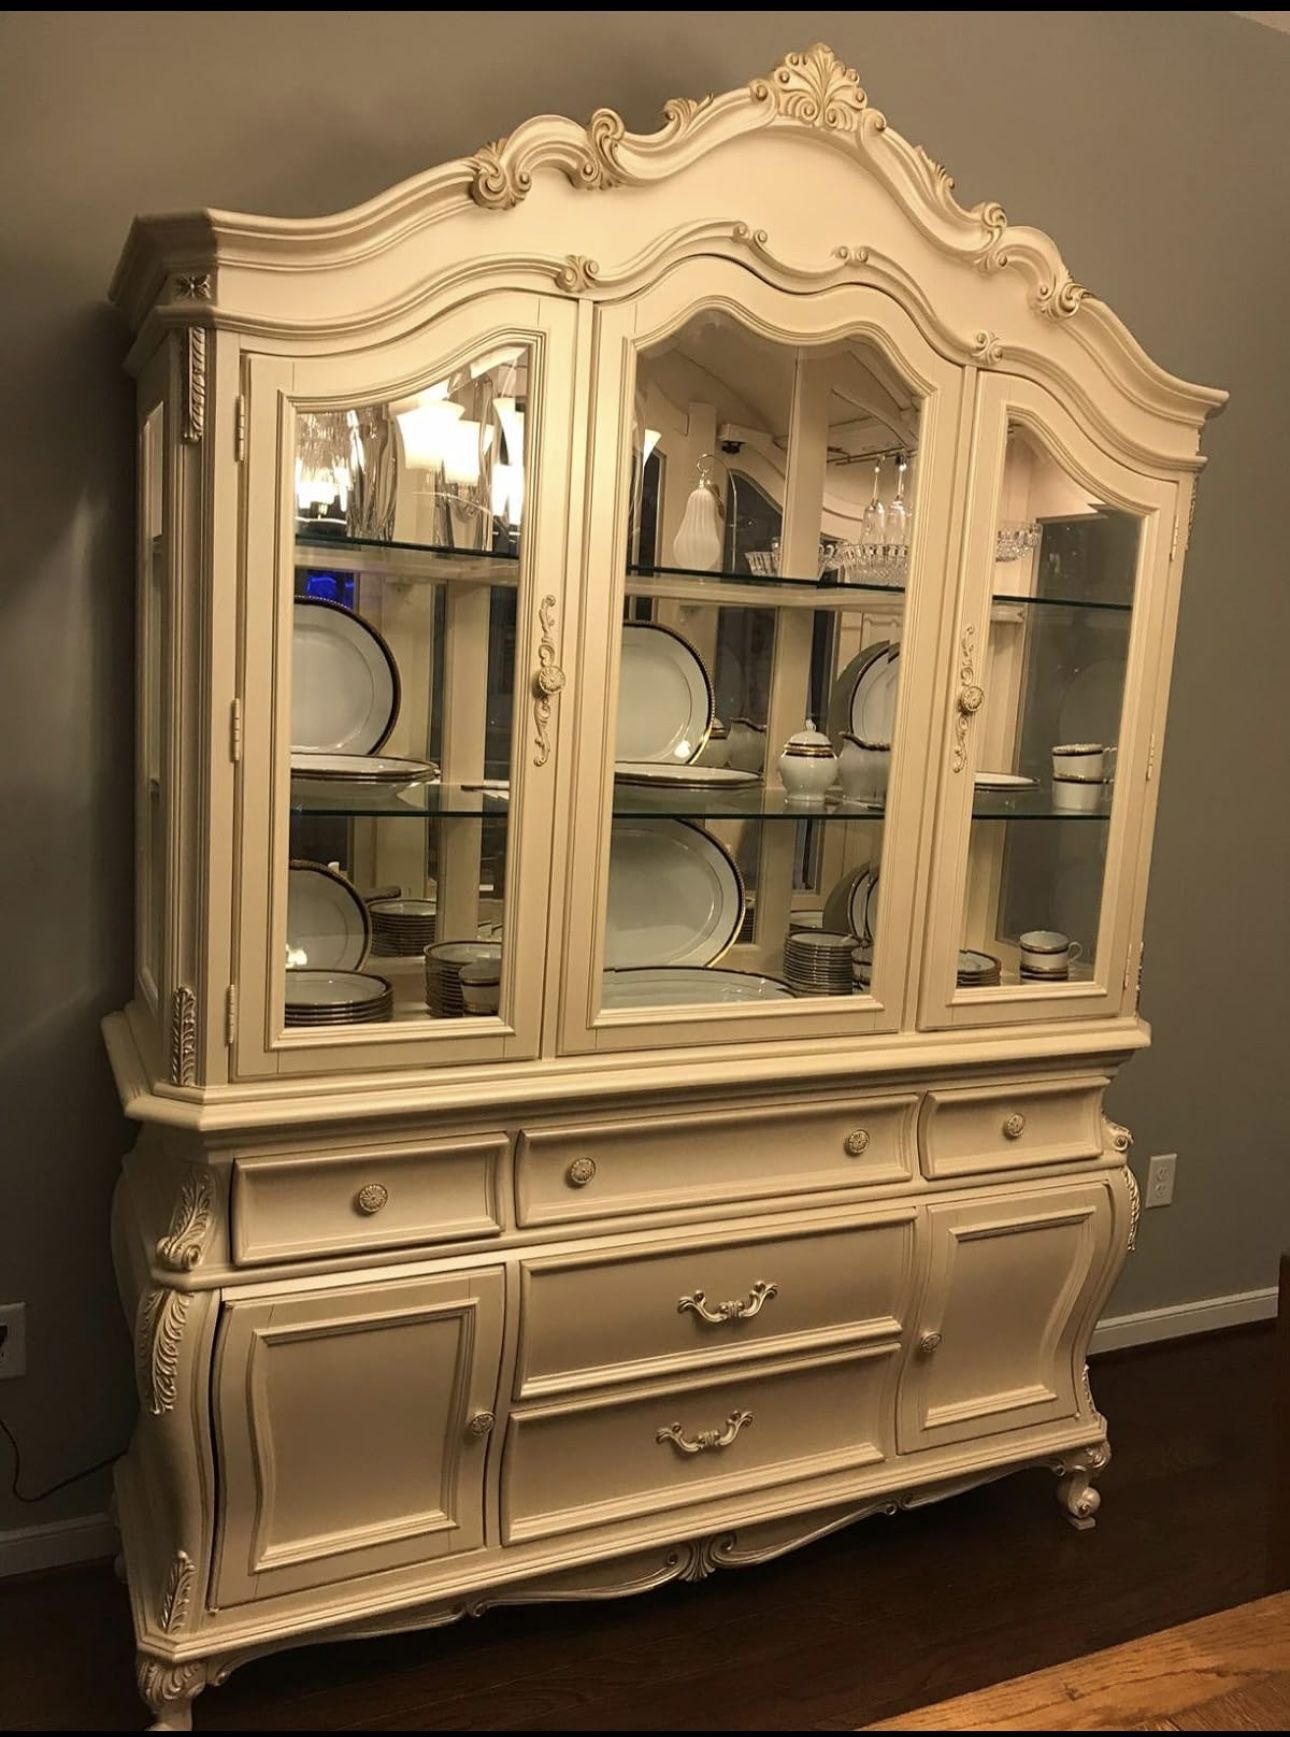 ACME Furniture Chantelle Pearl White Hutch and https://offerup.com/redirect/?o=QnVmZmV0Lmlt Taking The Best Offer.  